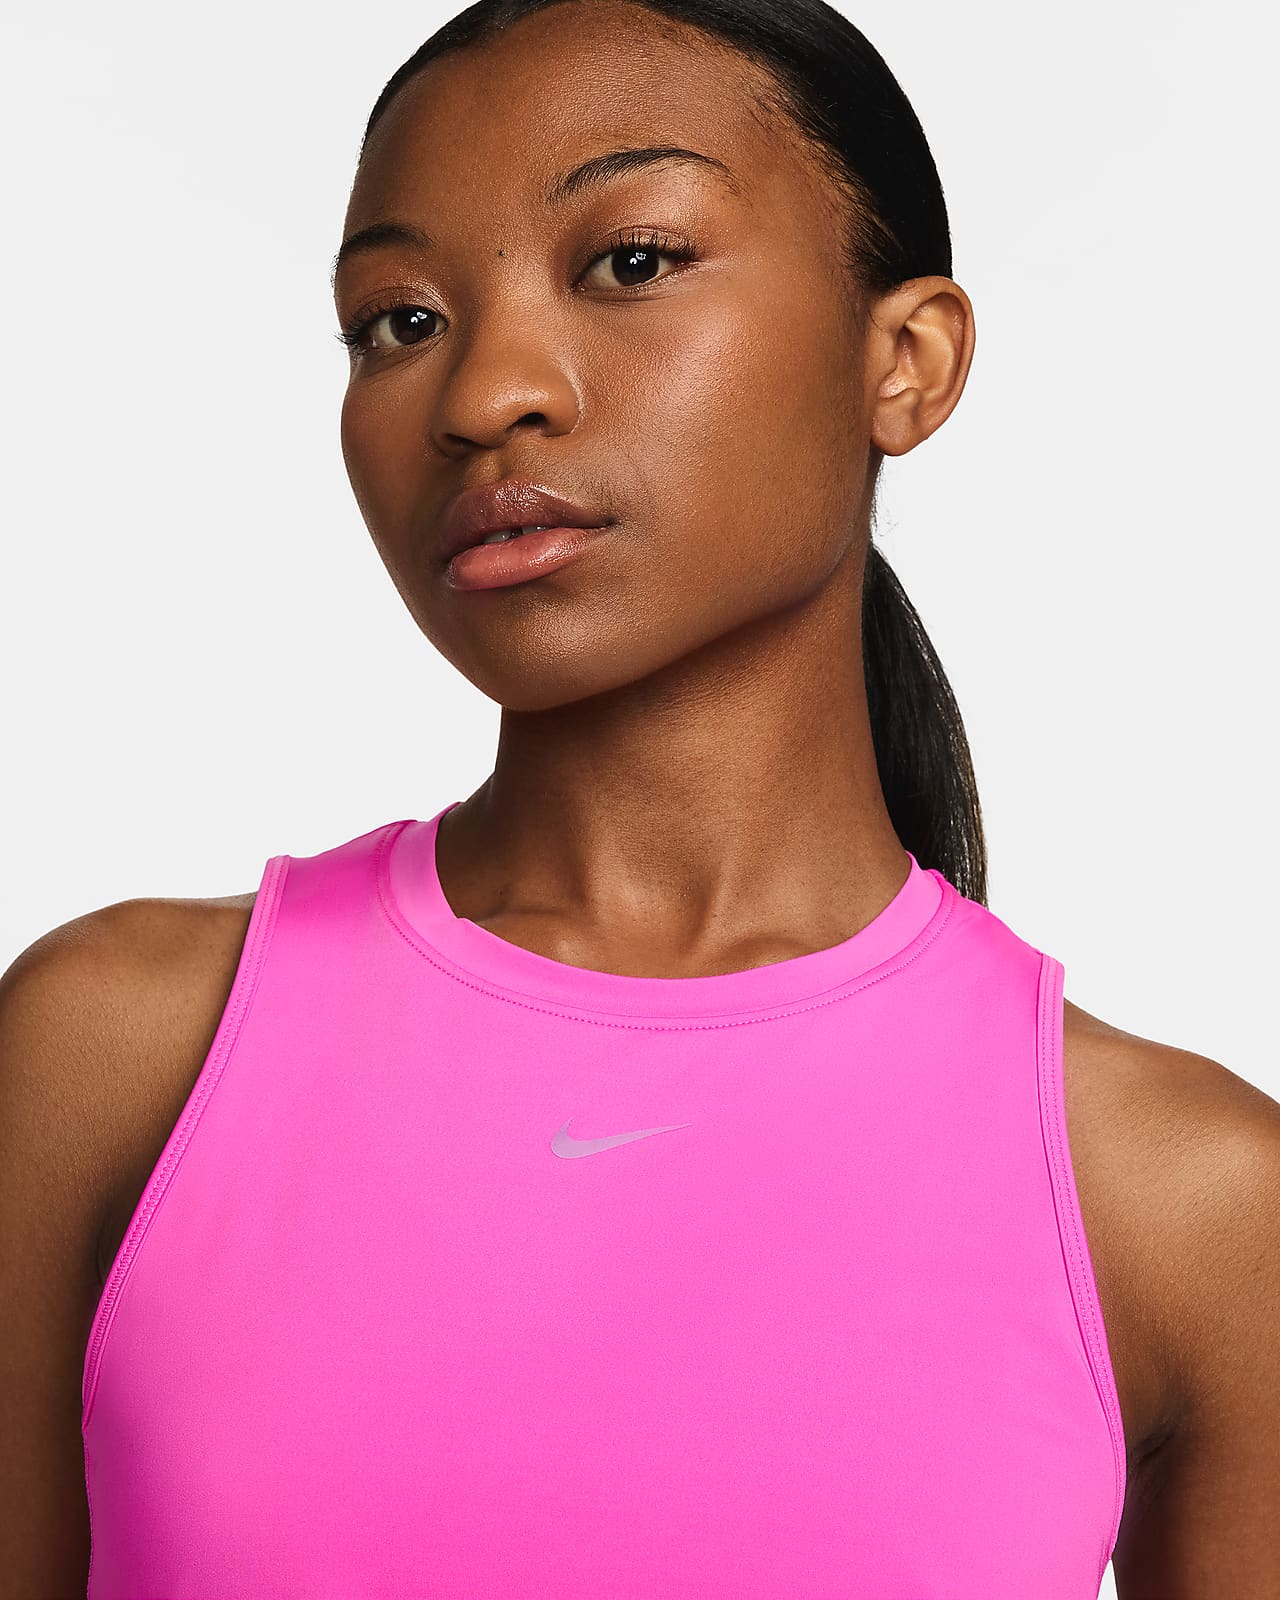 Slim-fit tank top for women Nike One Dri-Fit - Tank tops - The Heights -  Womens Clothing